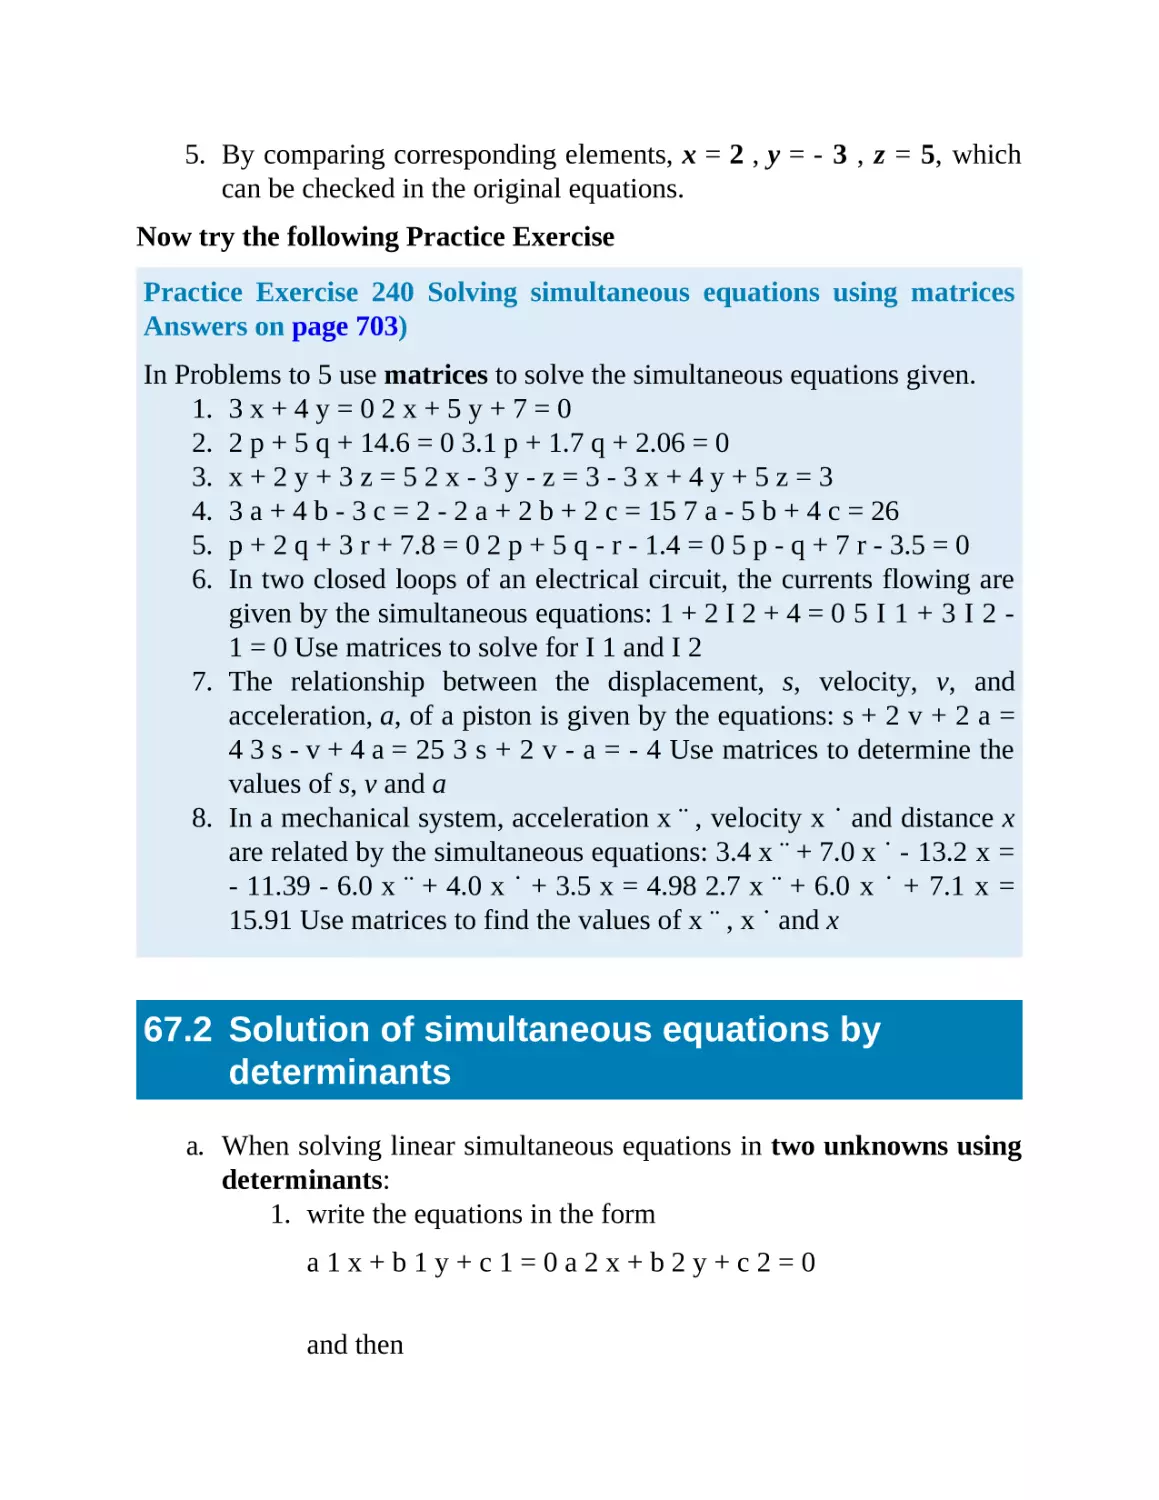 67.2 Solution of simultaneous equations by determinants